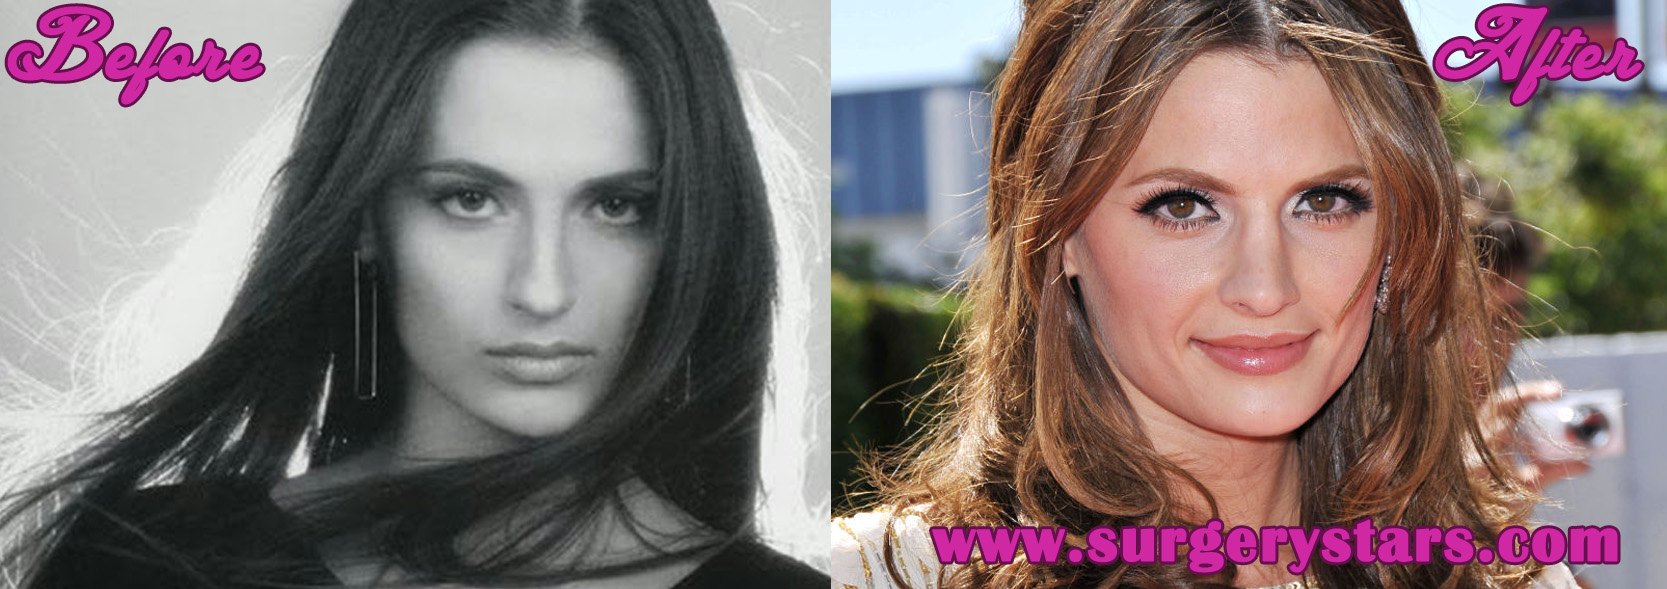 Stana Katic Nose Job - Before and After Pictures.